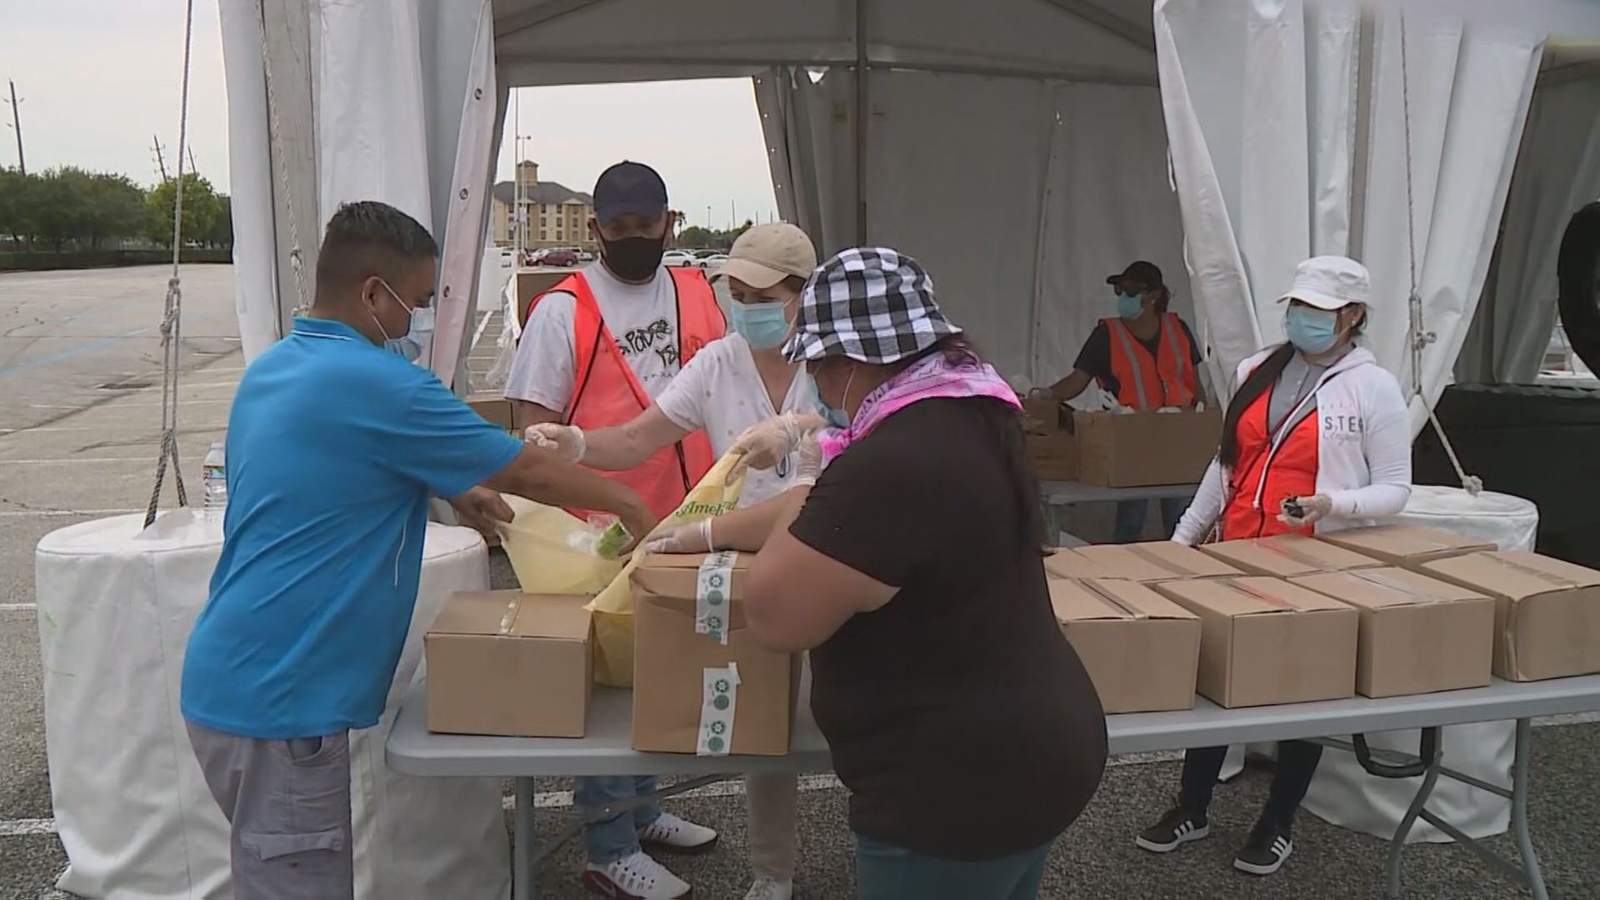 Mass food distribution event rescheduled, testing sites closed Saturday due to severe weather